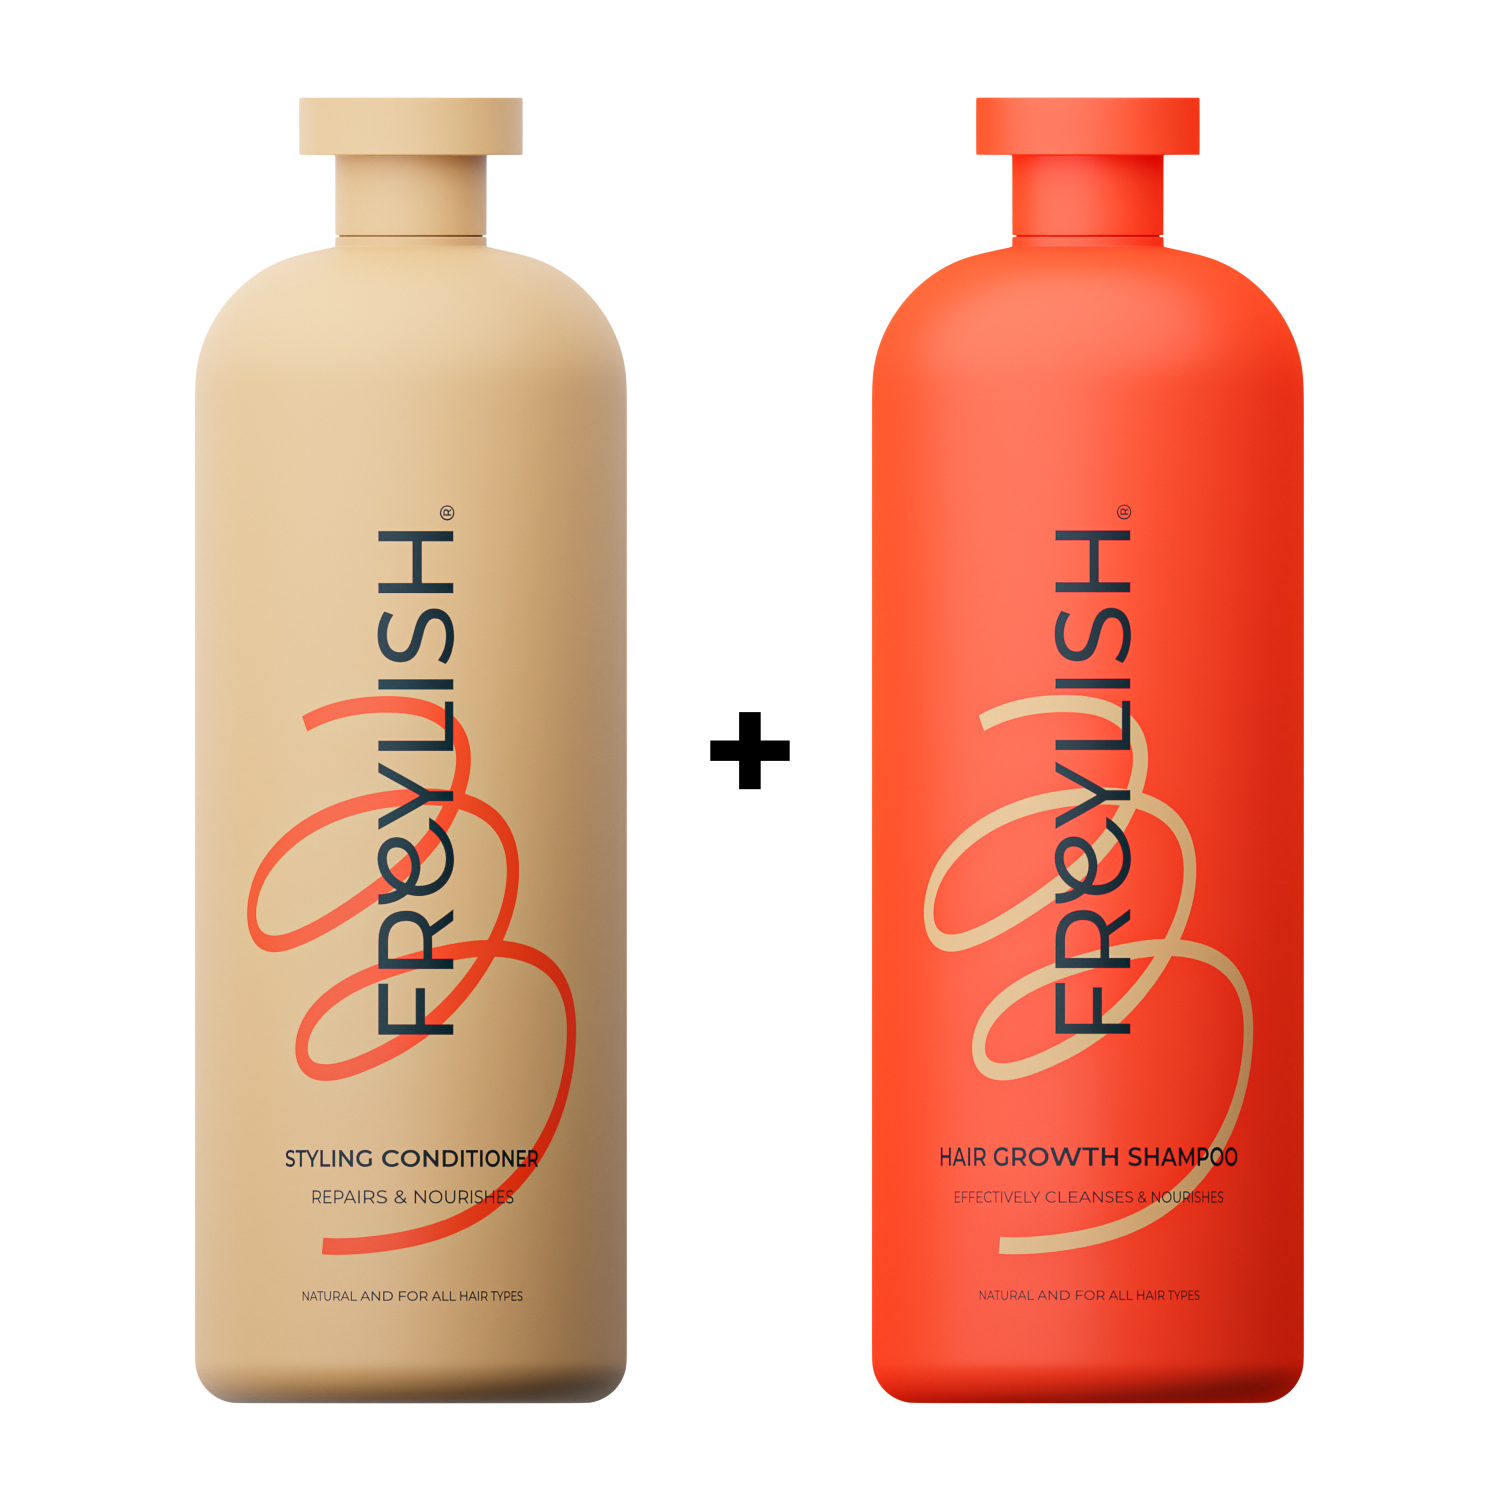 Syling Conditioner + Hair Growth Shampoo